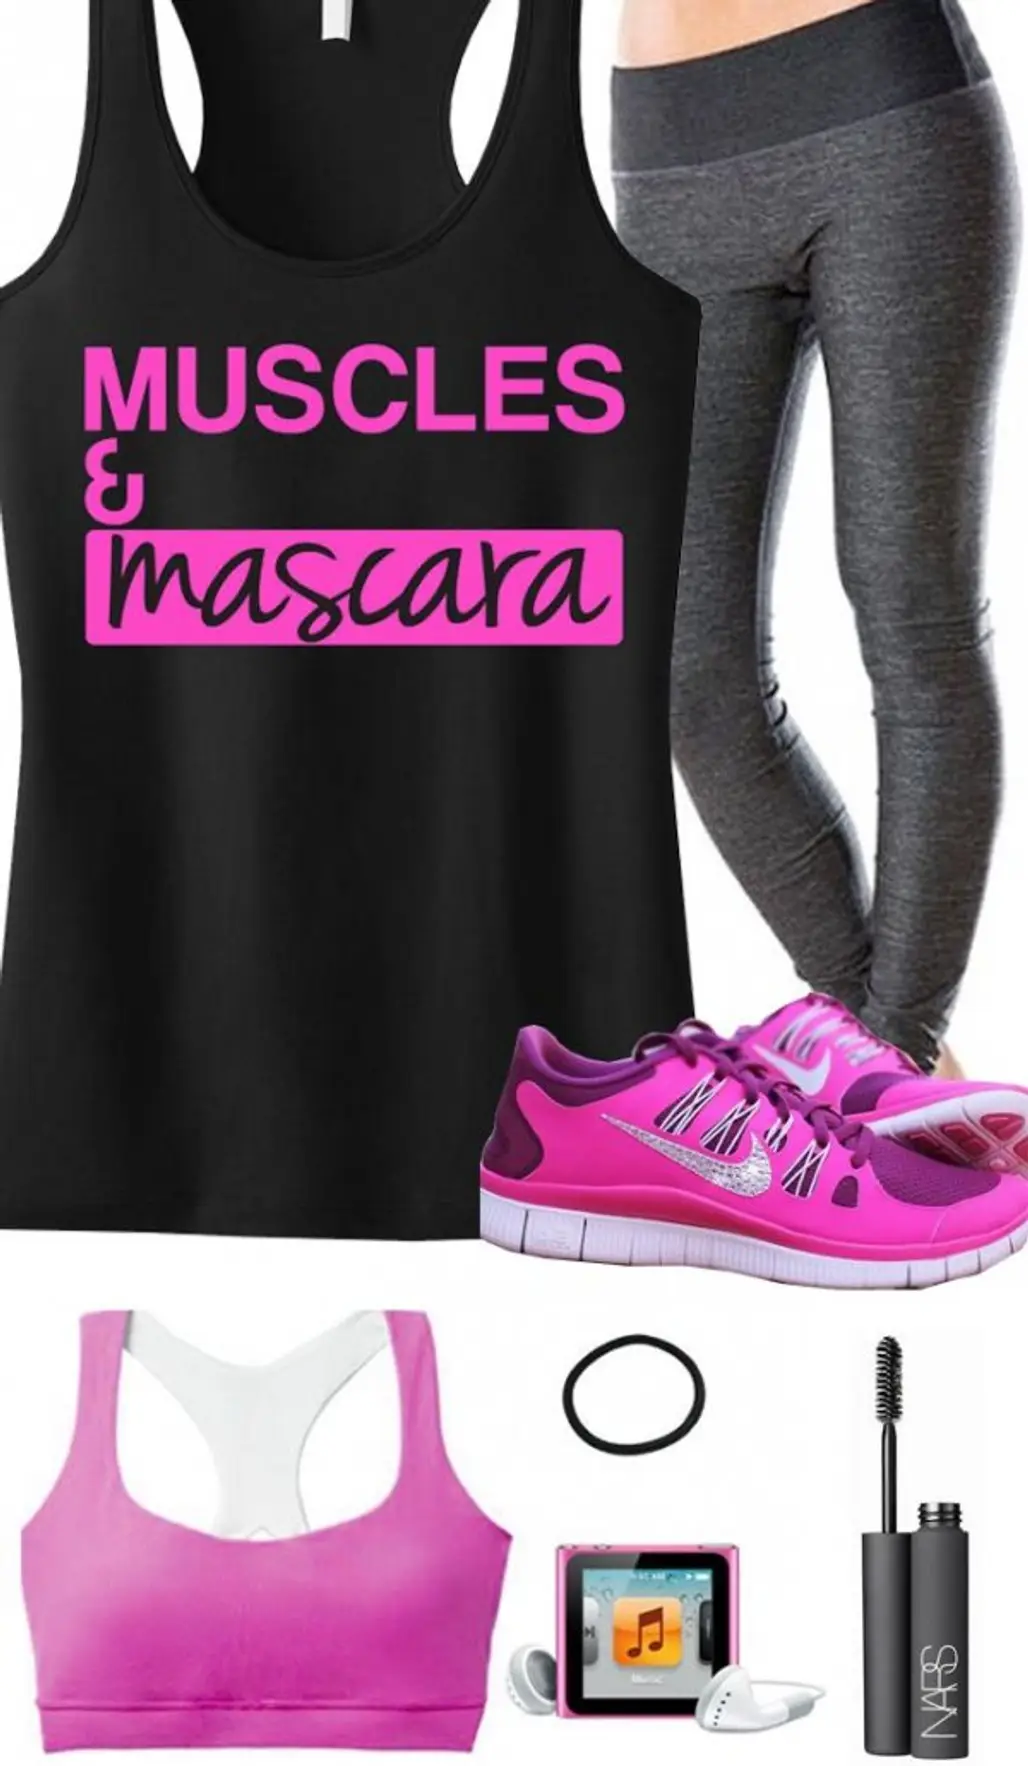 Confecciones,clothing,pink,sleeve,product,